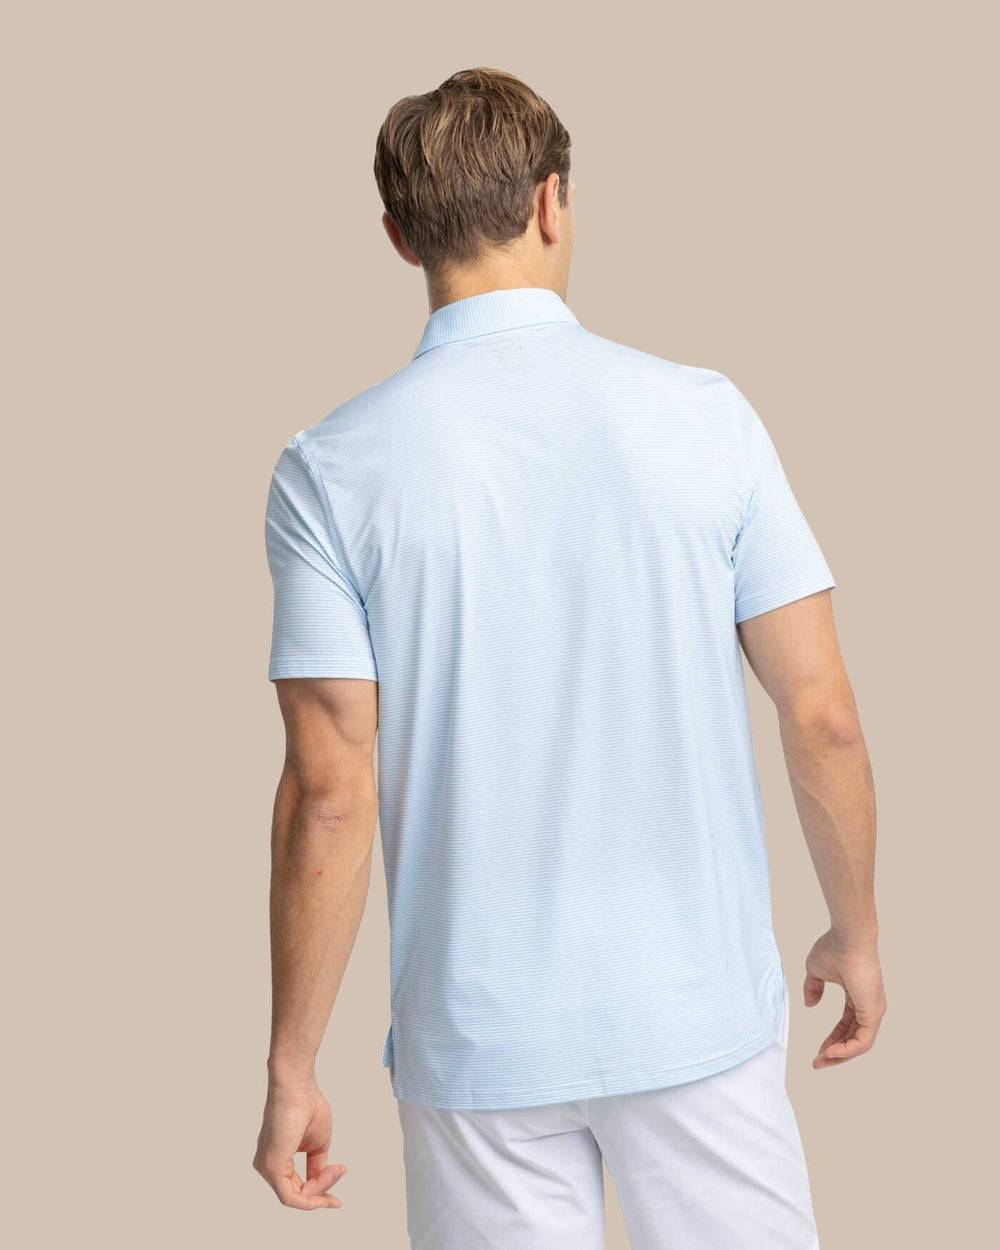 The back view of the Southern Tide brrr-eeze Meadowbrook Stripe Polo by Southern Tide - Clearwater Blue